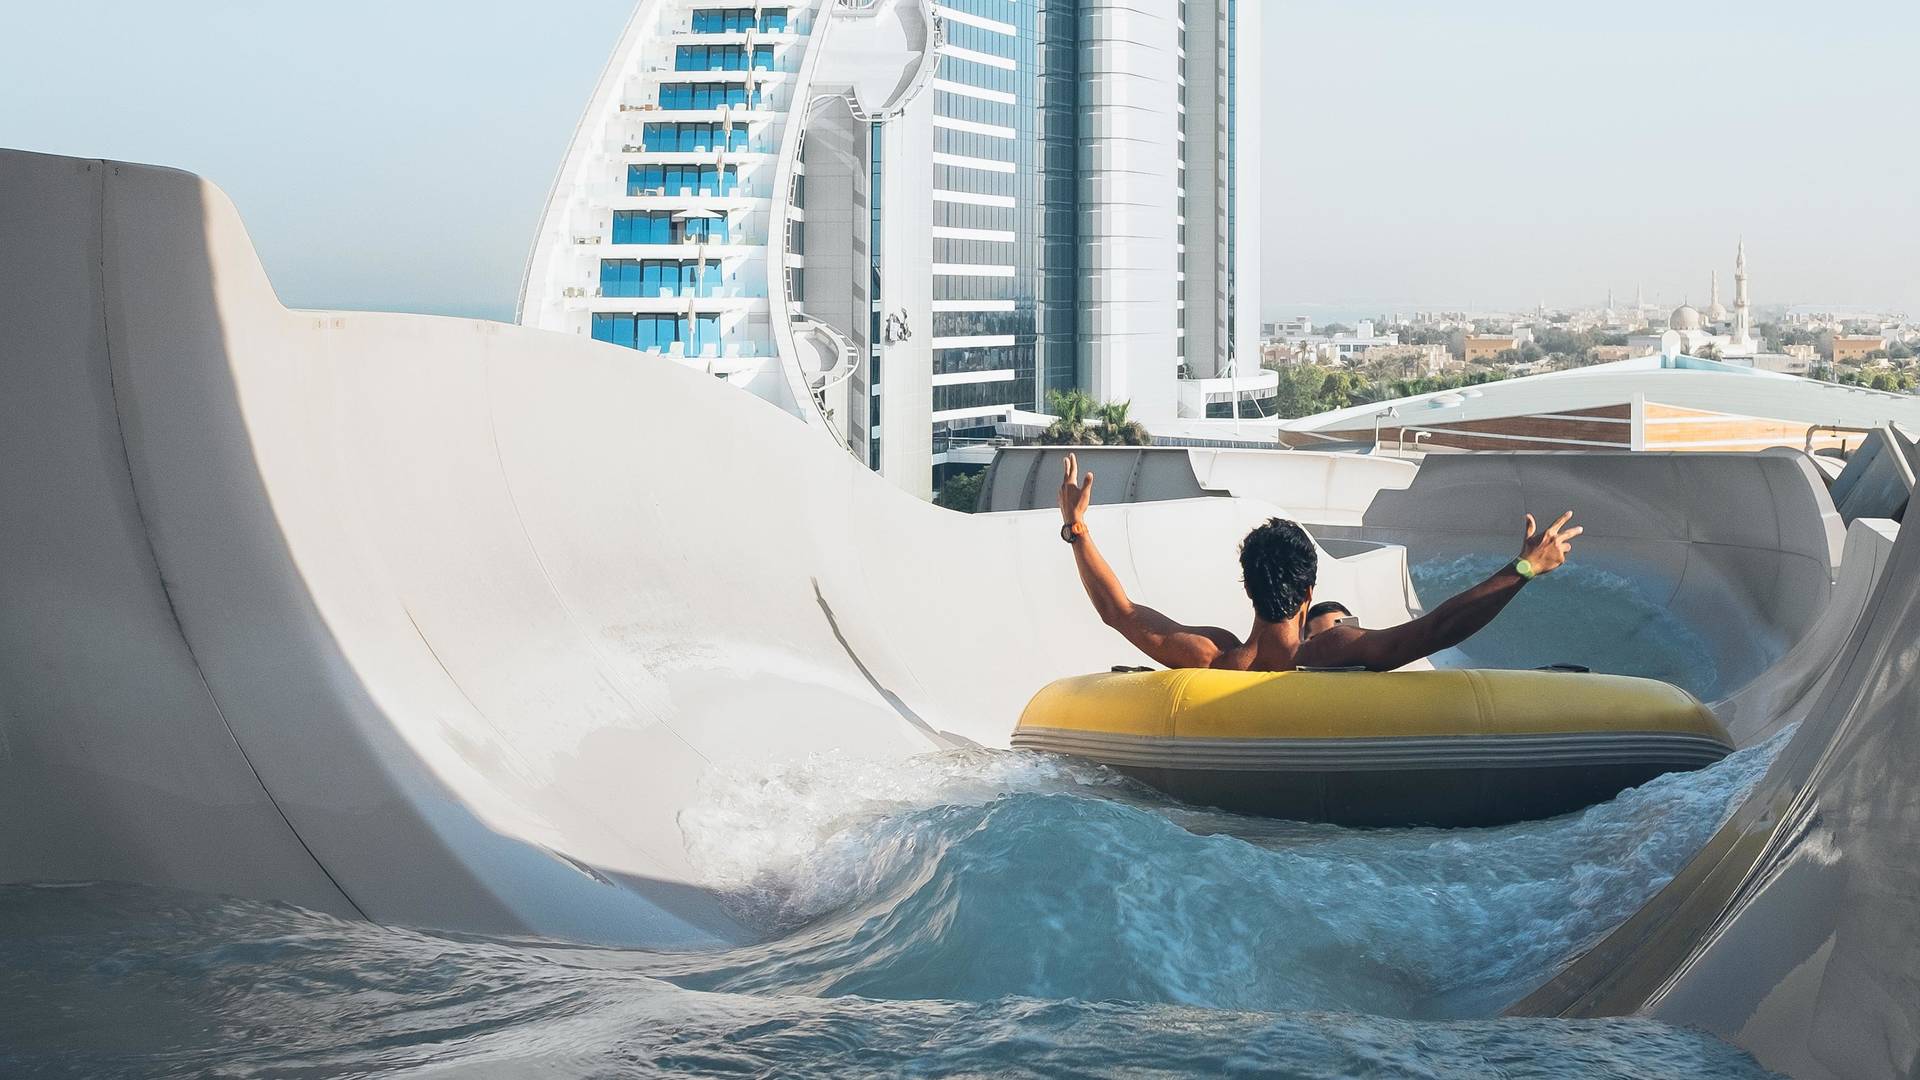 Man on a water slide